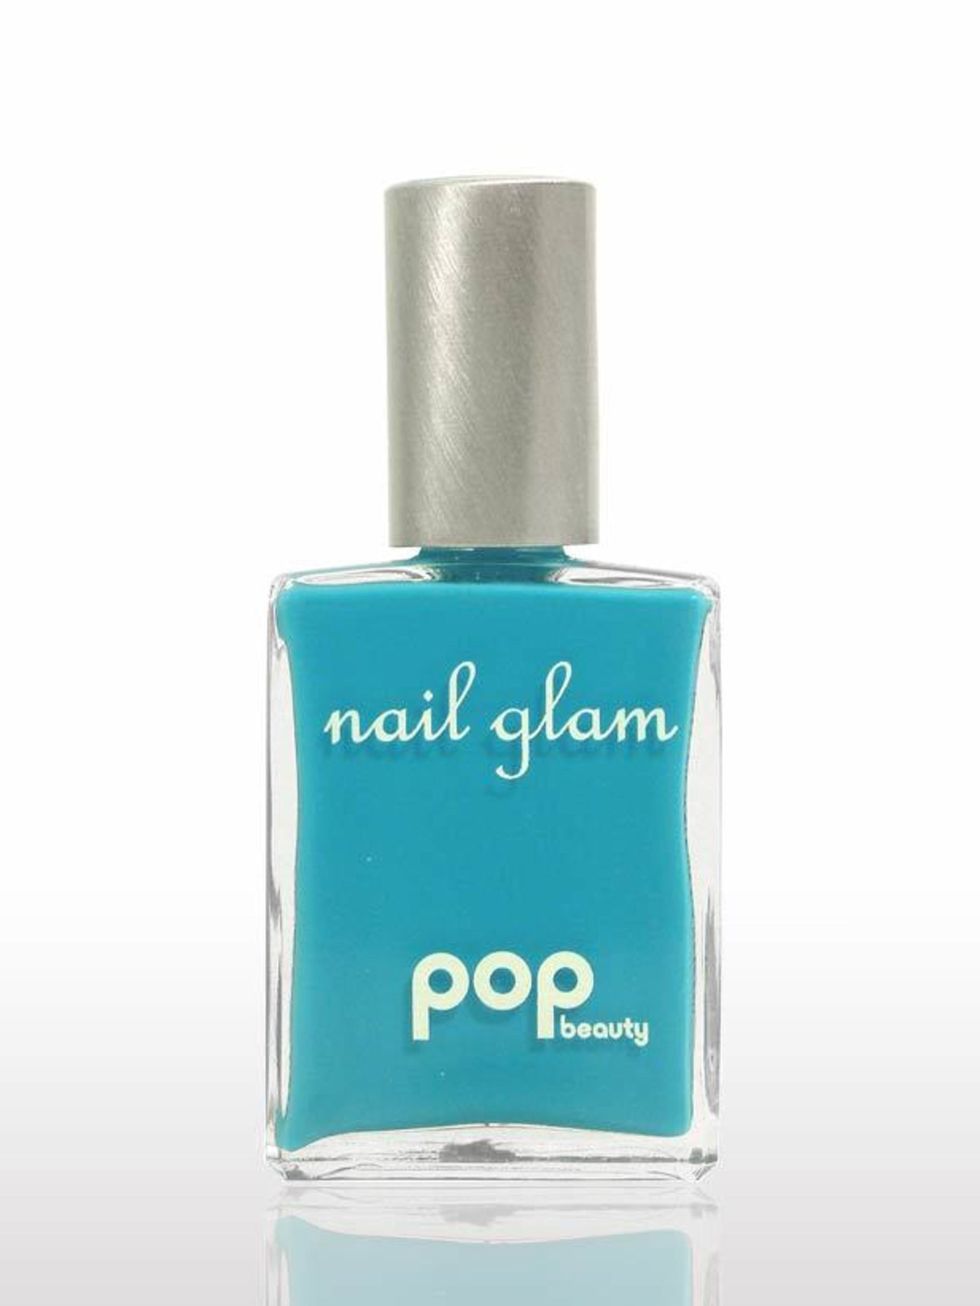 <p>Nail polish in Turquoise, £6 by <a href="http://www.popbeauty.co.uk/Popbeauty_Products/Nails/Nail_Glam/index.html">Pop</a></p><p>Clash this bold turquoise polish with other brights like red lips or purple eyes.</p>